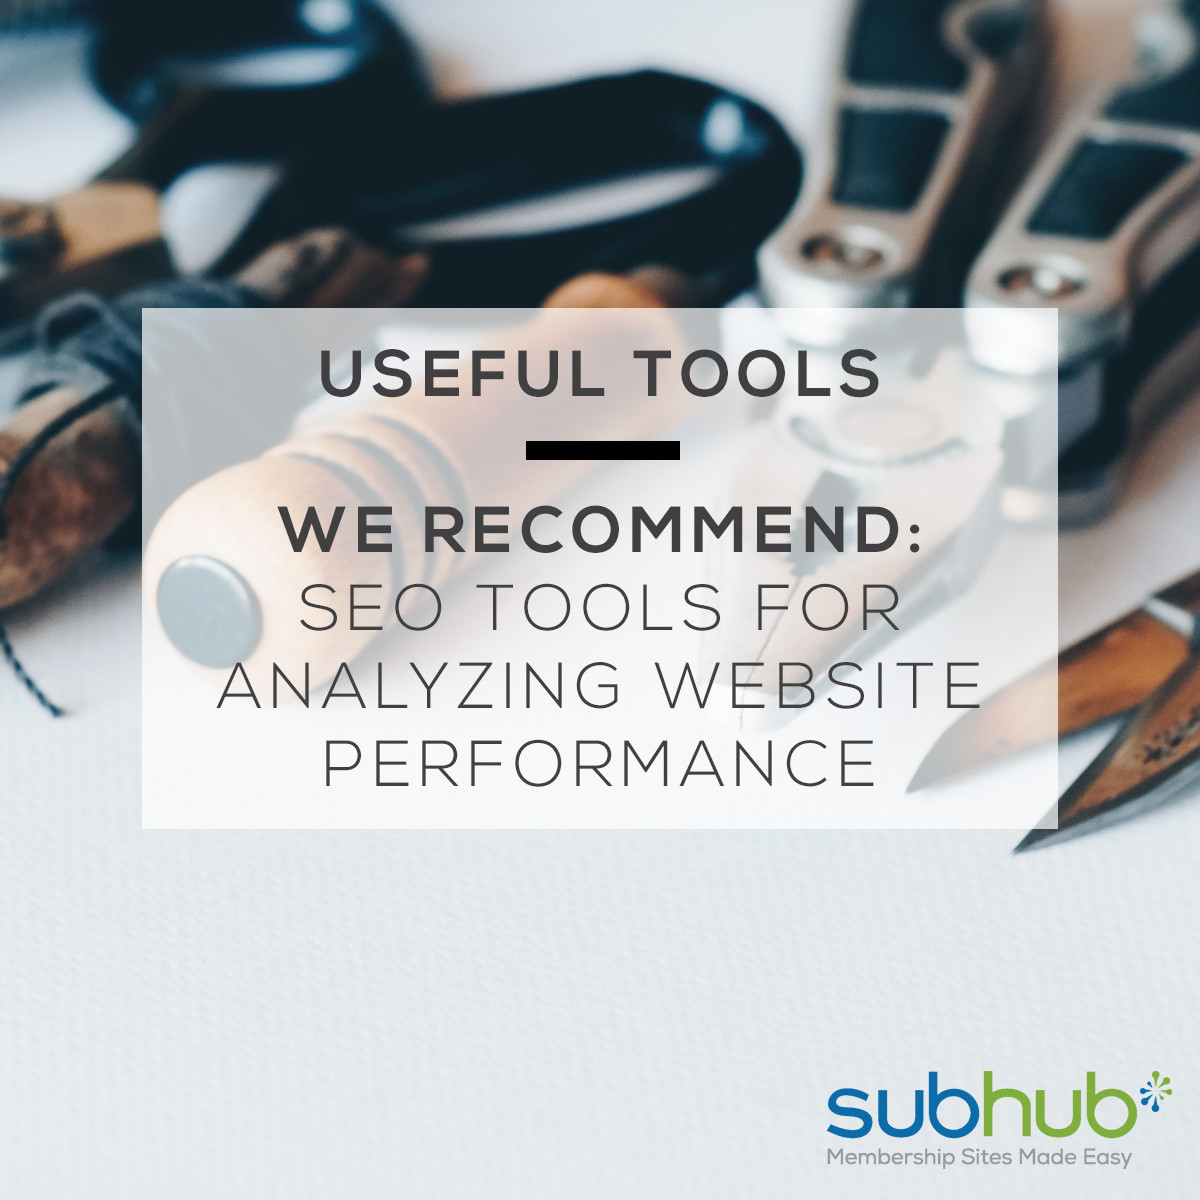 seo-tools-for-analyzing-website-performance